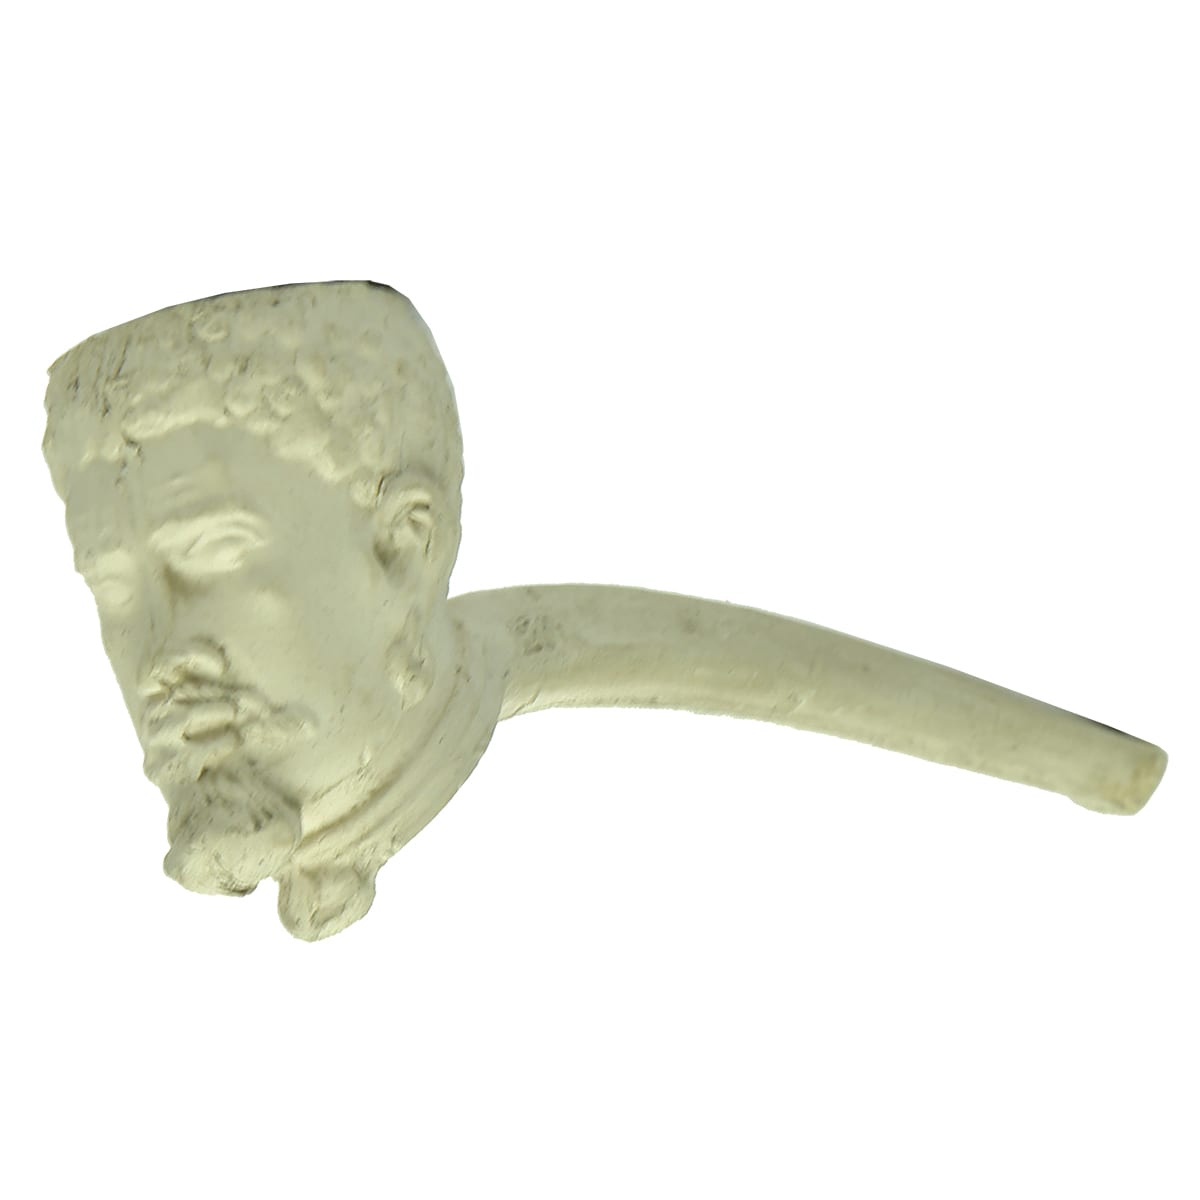 Clay Pipe. Bearded man with earrings.